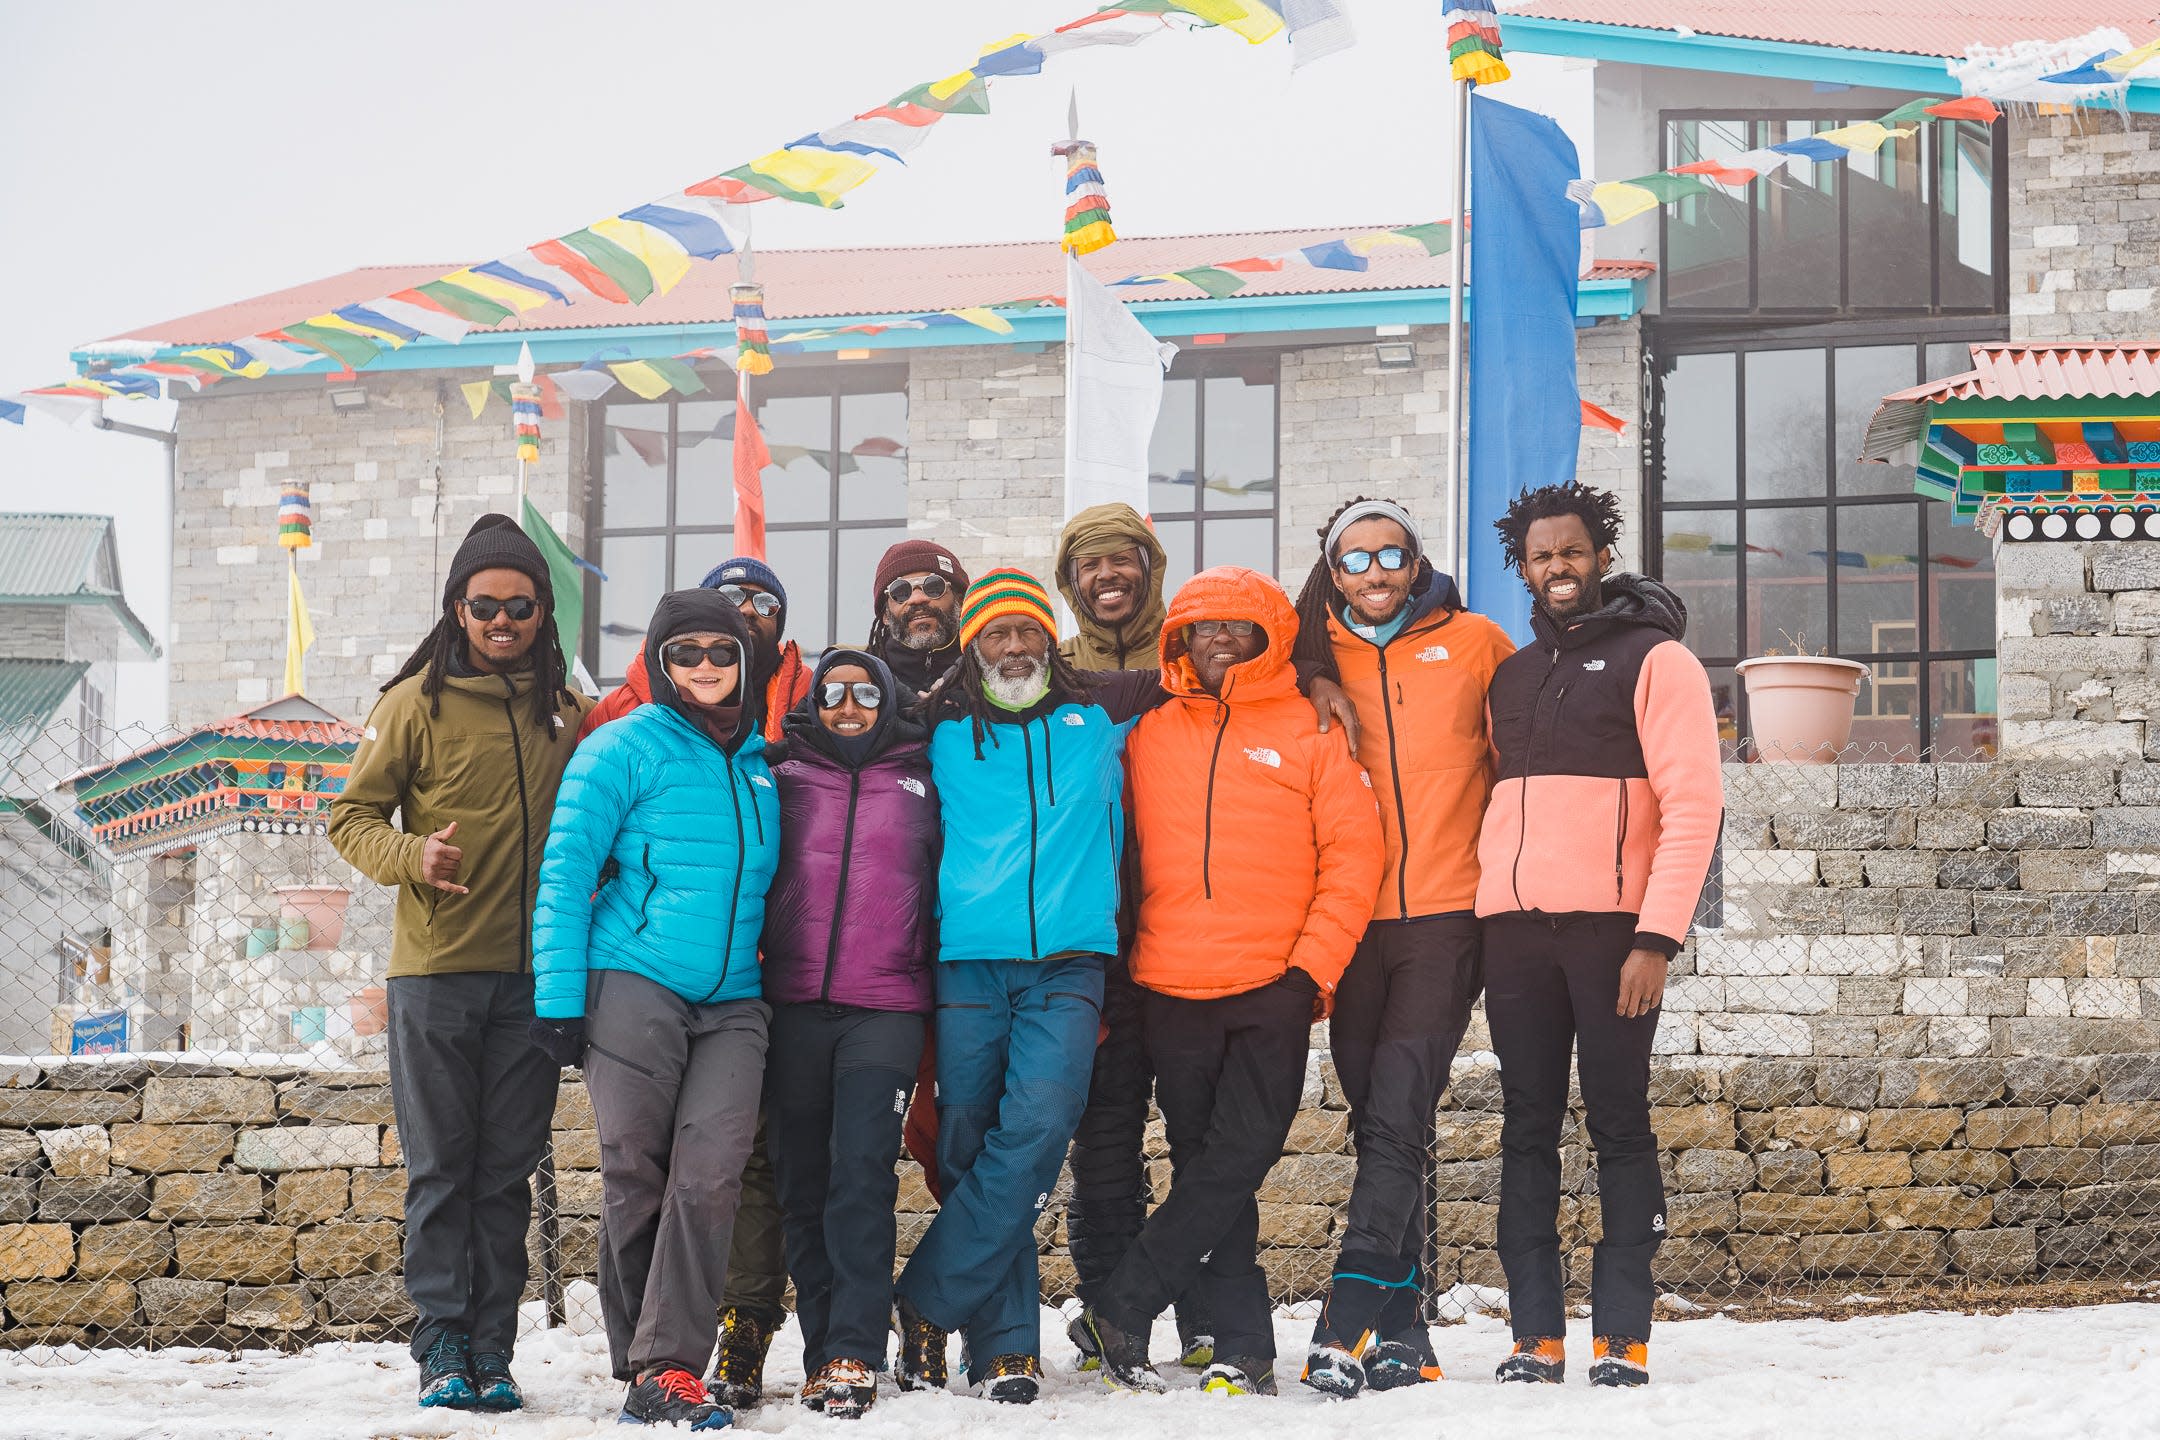 History created: First all-Black American team summits Mount Everest